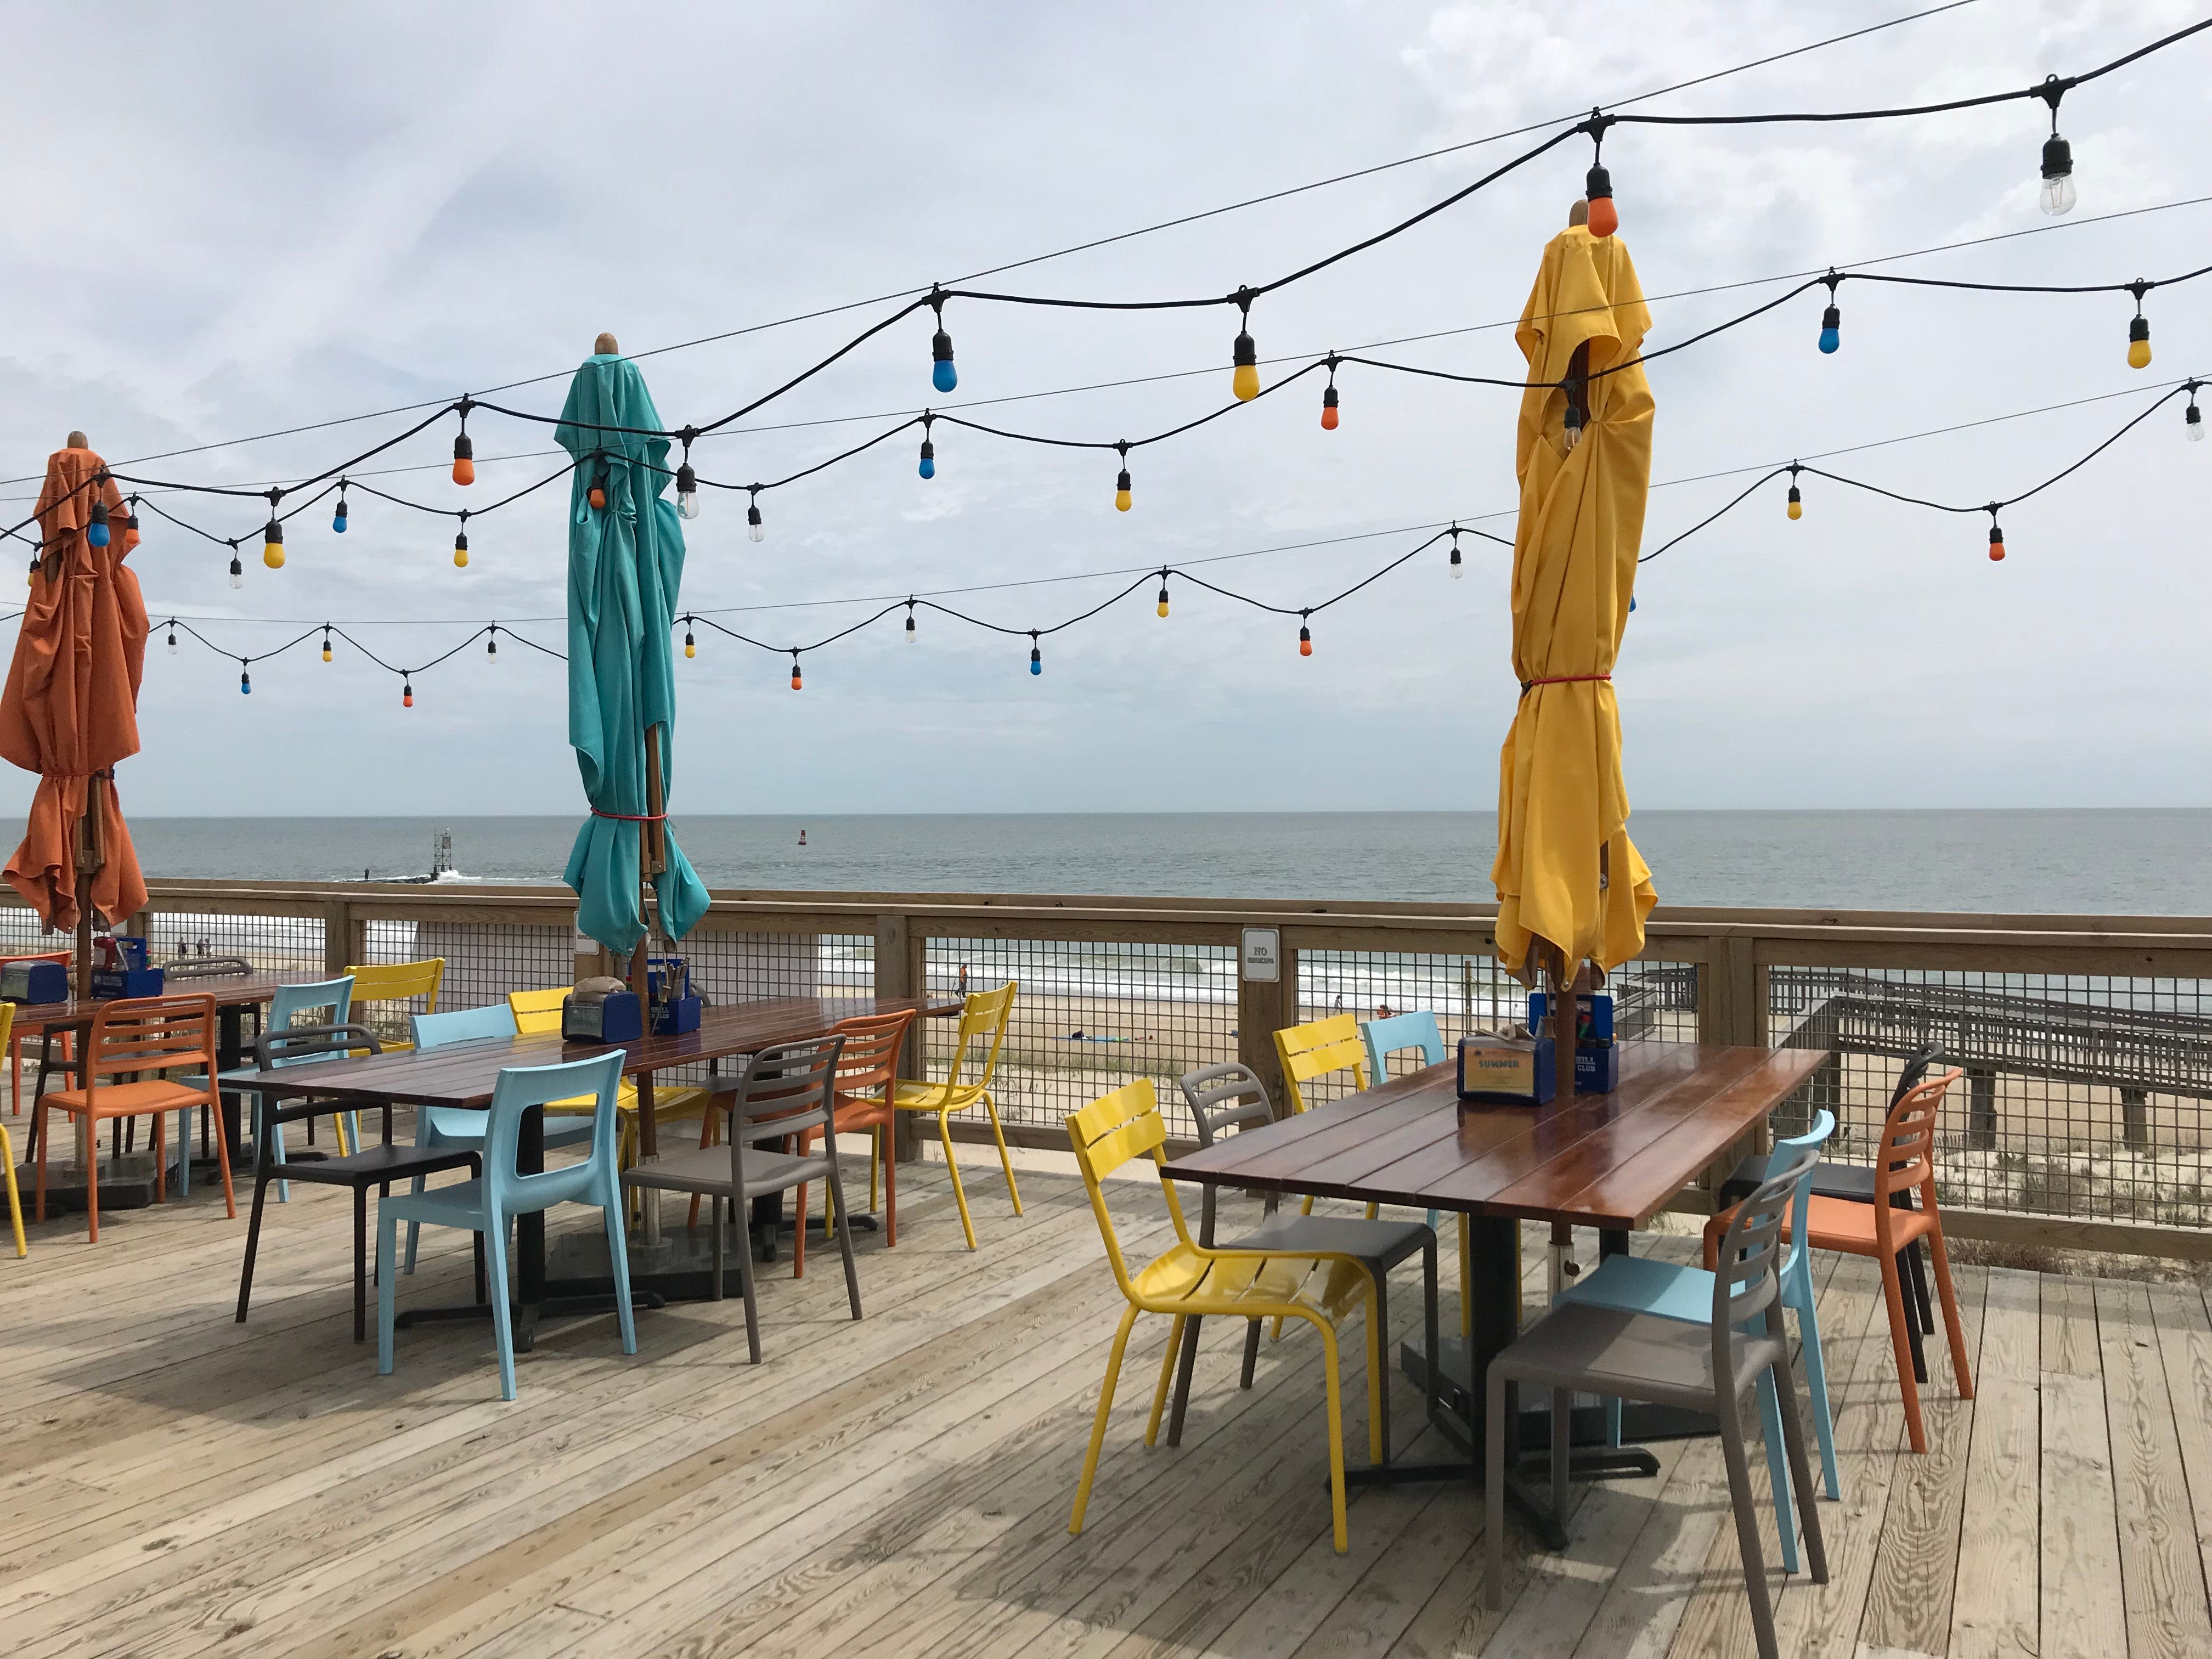 Dine outdoors at these restaurants in and around Delaware